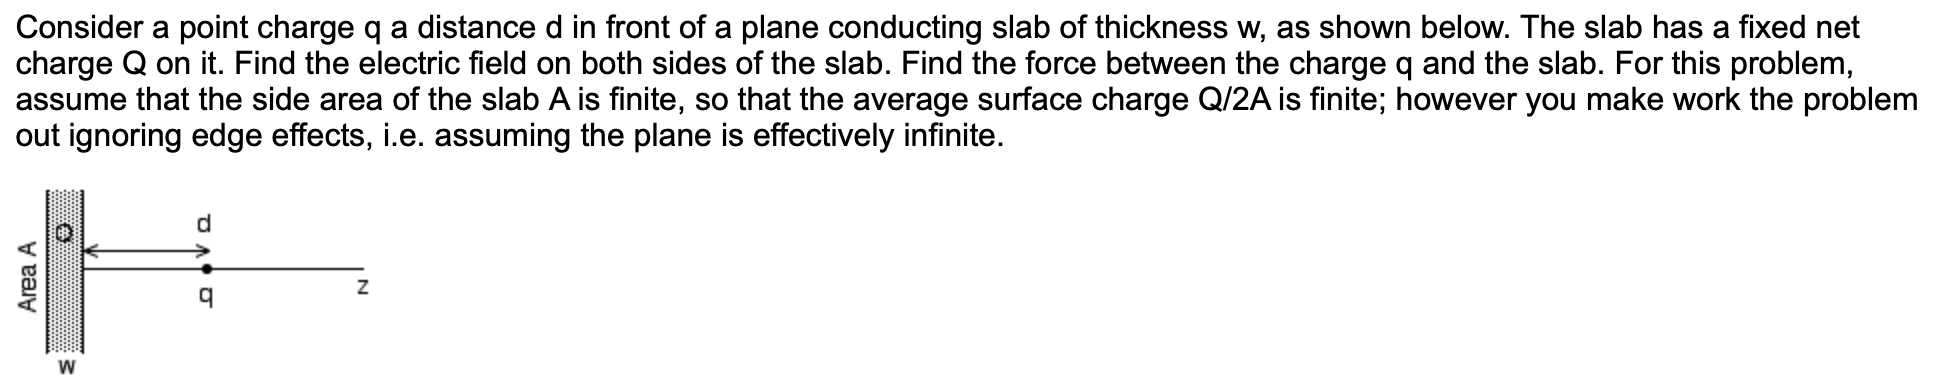 Consider a point charge q a distance d in front of a plane conducting slab of thickness w, as shown below. The slab has a fixed net
charge Q on it. Find the electric field on both sides of the slab. Find the force between the charge q and the slab. For this problem,
assume that the side area of the slab A is finite, so that the average surface charge Q/2A is finite; however you make work the problem
out ignoring edge effects, i.e. assuming the plane is effectively infinite.
d
Z
q
Area A
